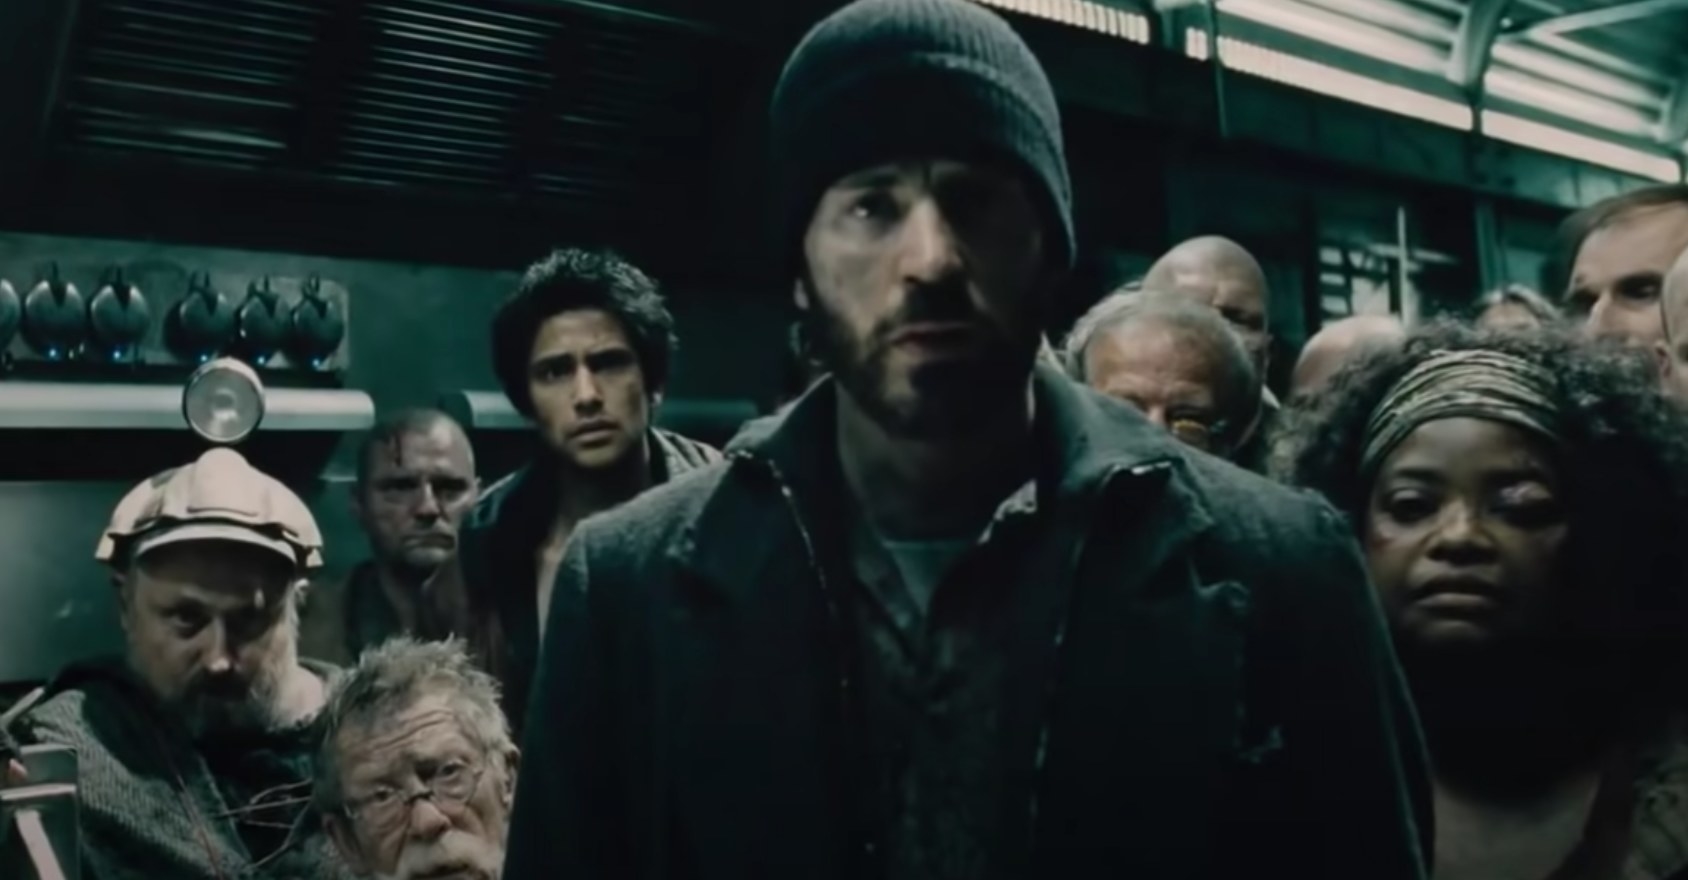 People squashed on the tail end of the train in Snowpiercer